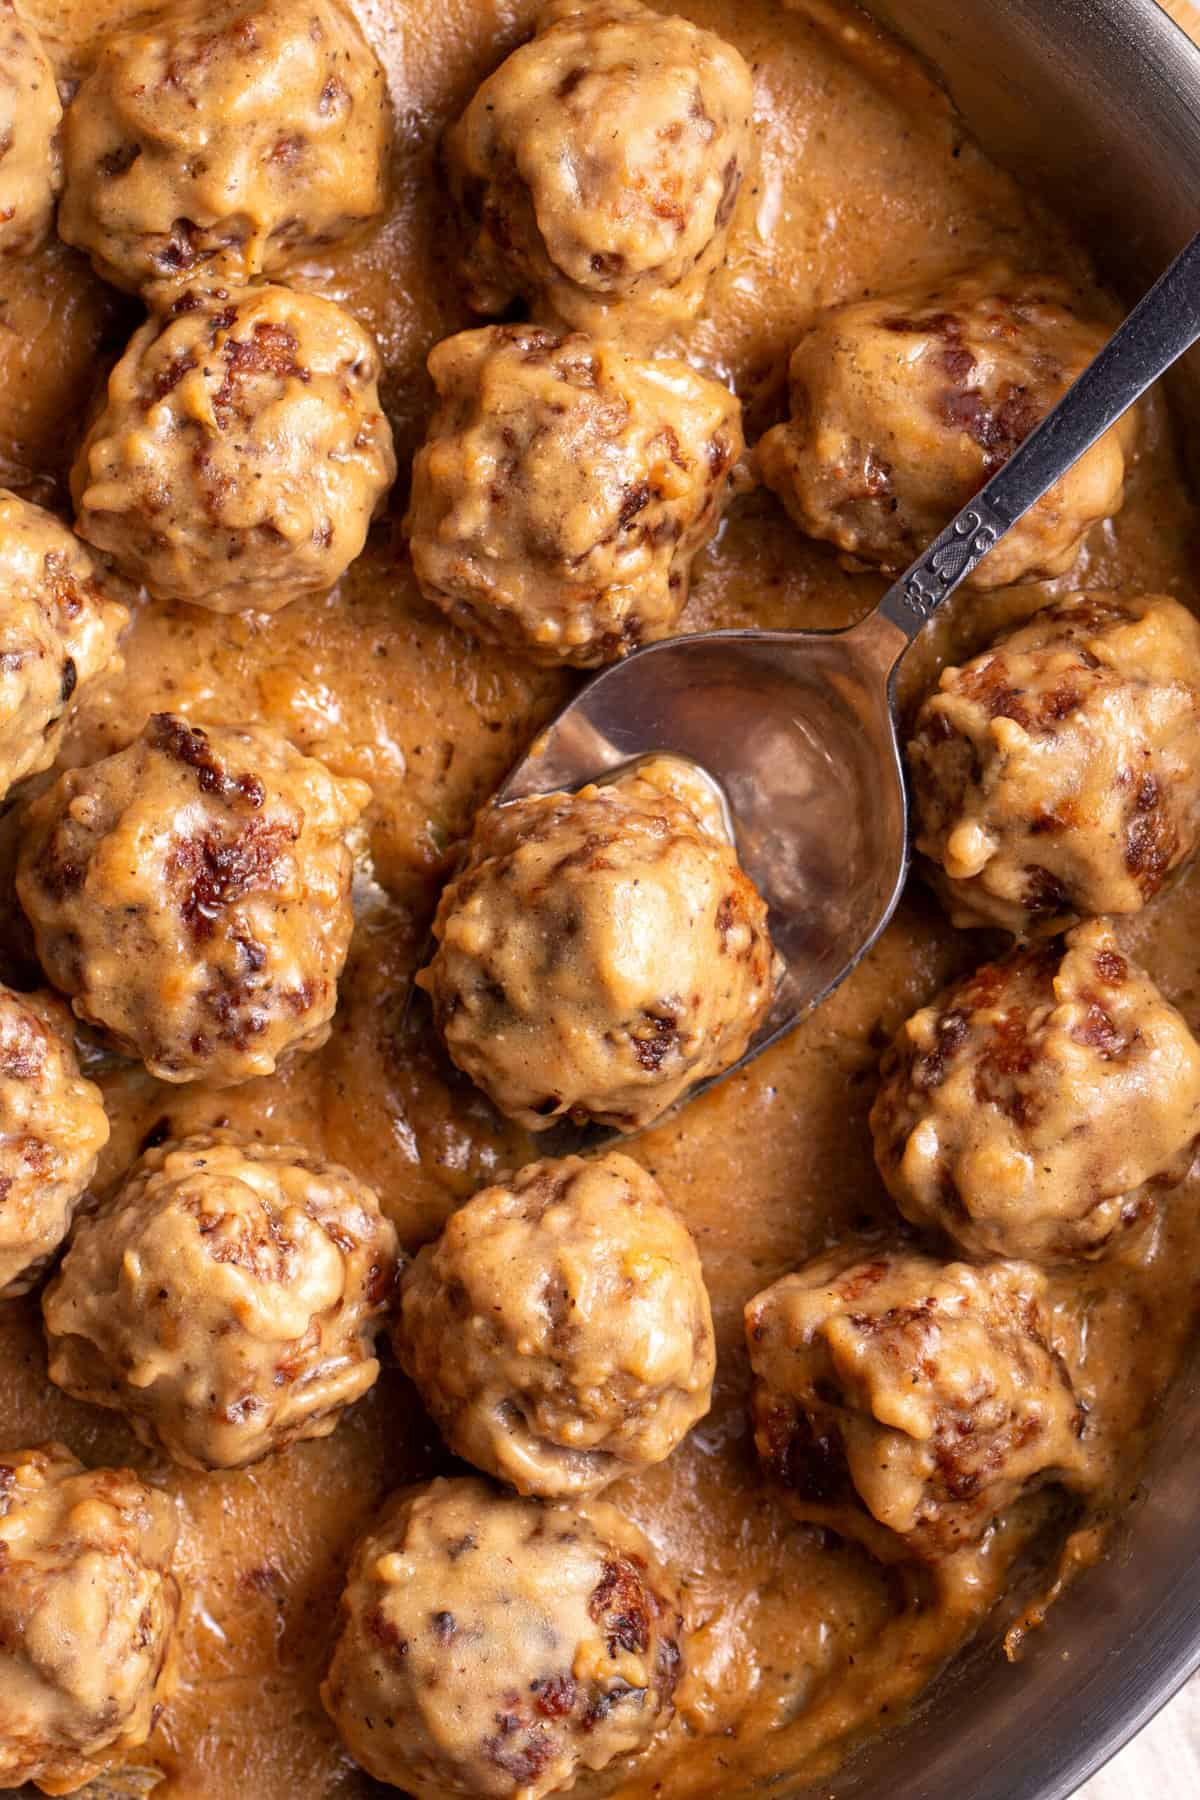 close up image of Swedish meatballs with gravy served in a stainless steel pan.